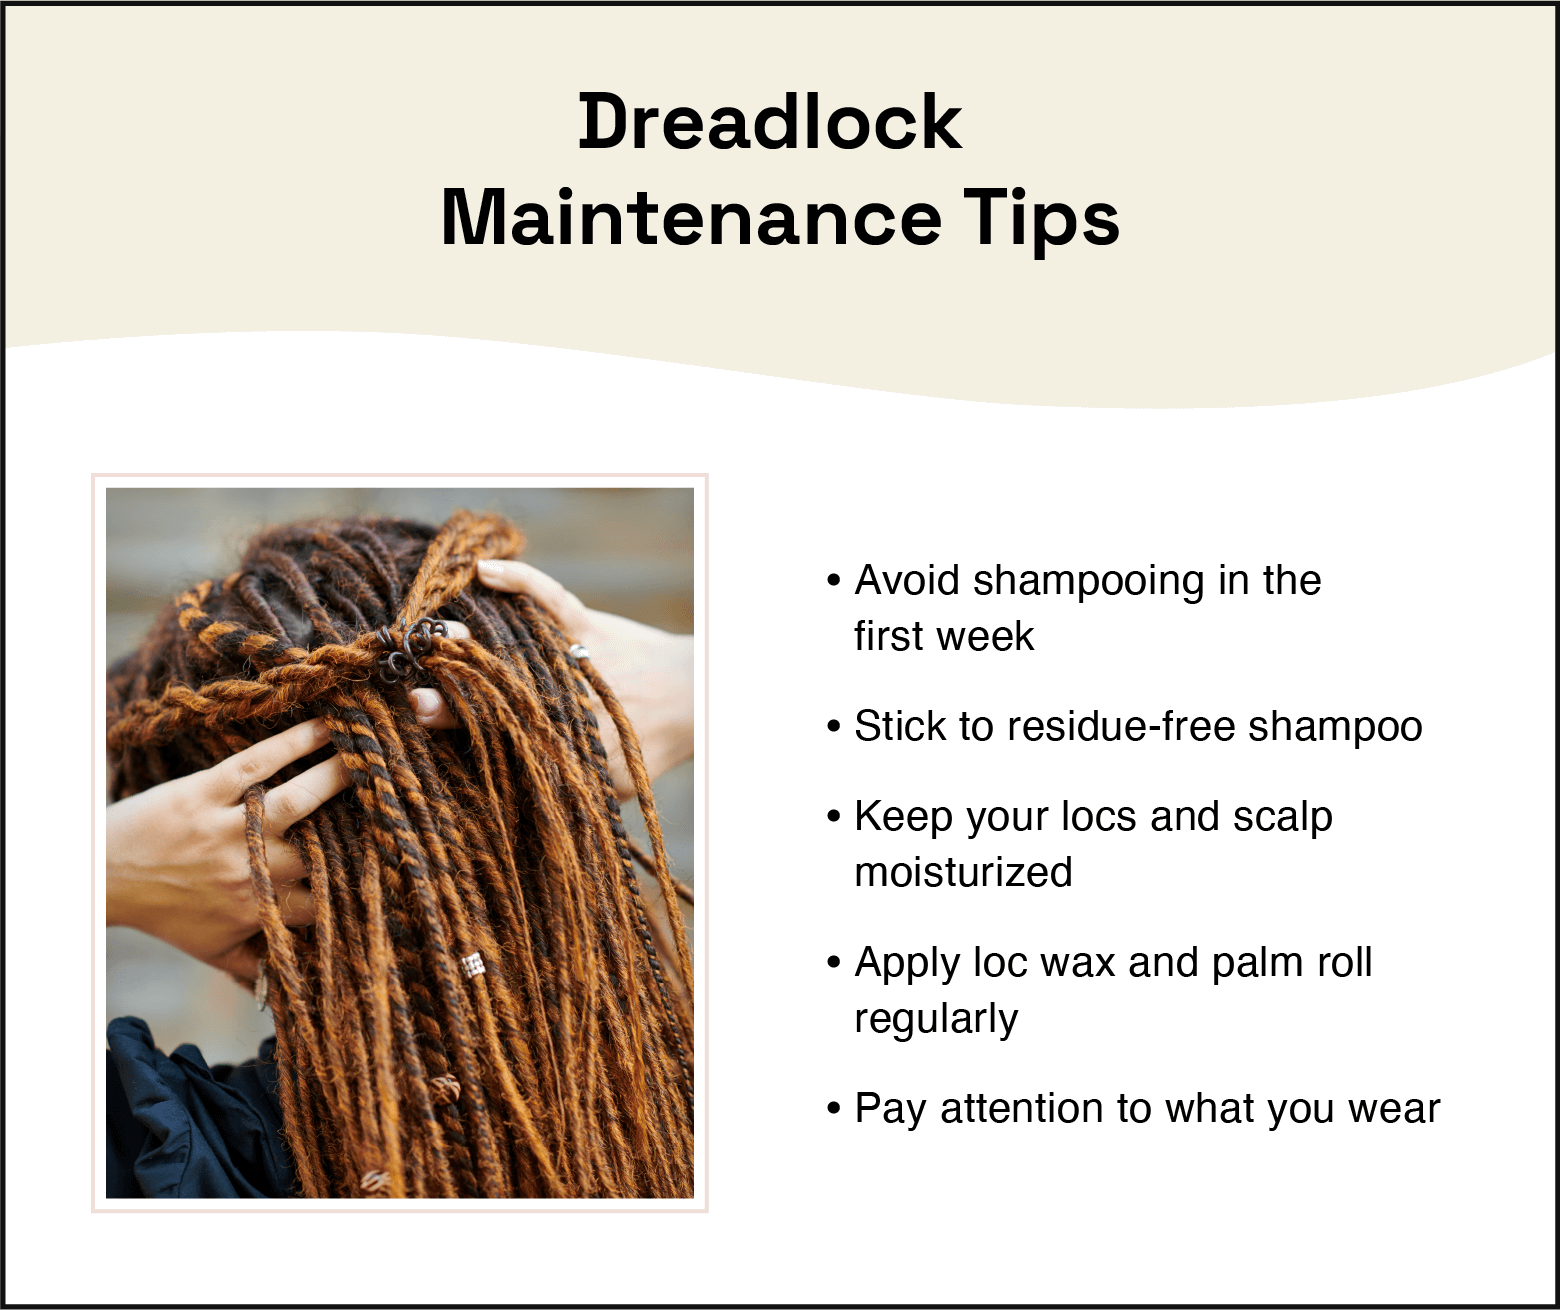 photo on the left with a close up on half-up, half-down dreadlocks and tips on the right for dreadlock maintenance